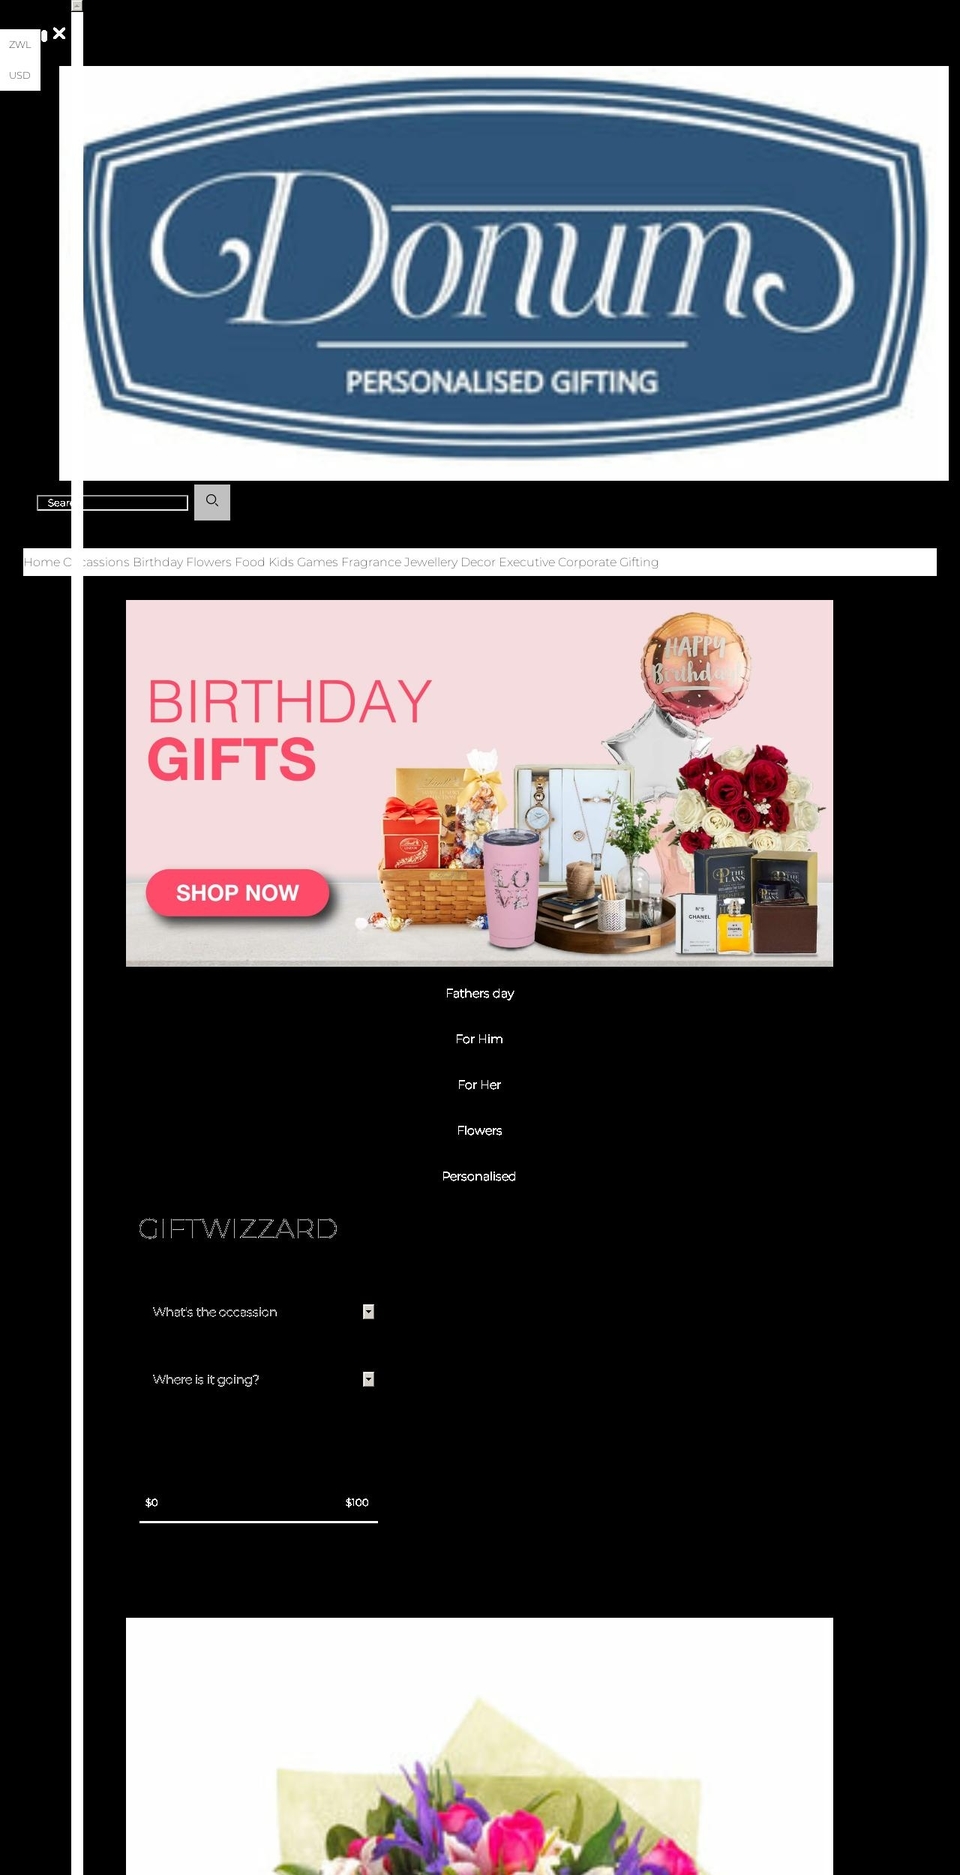 Gifts Shopify theme site example donumgifts.co.zw